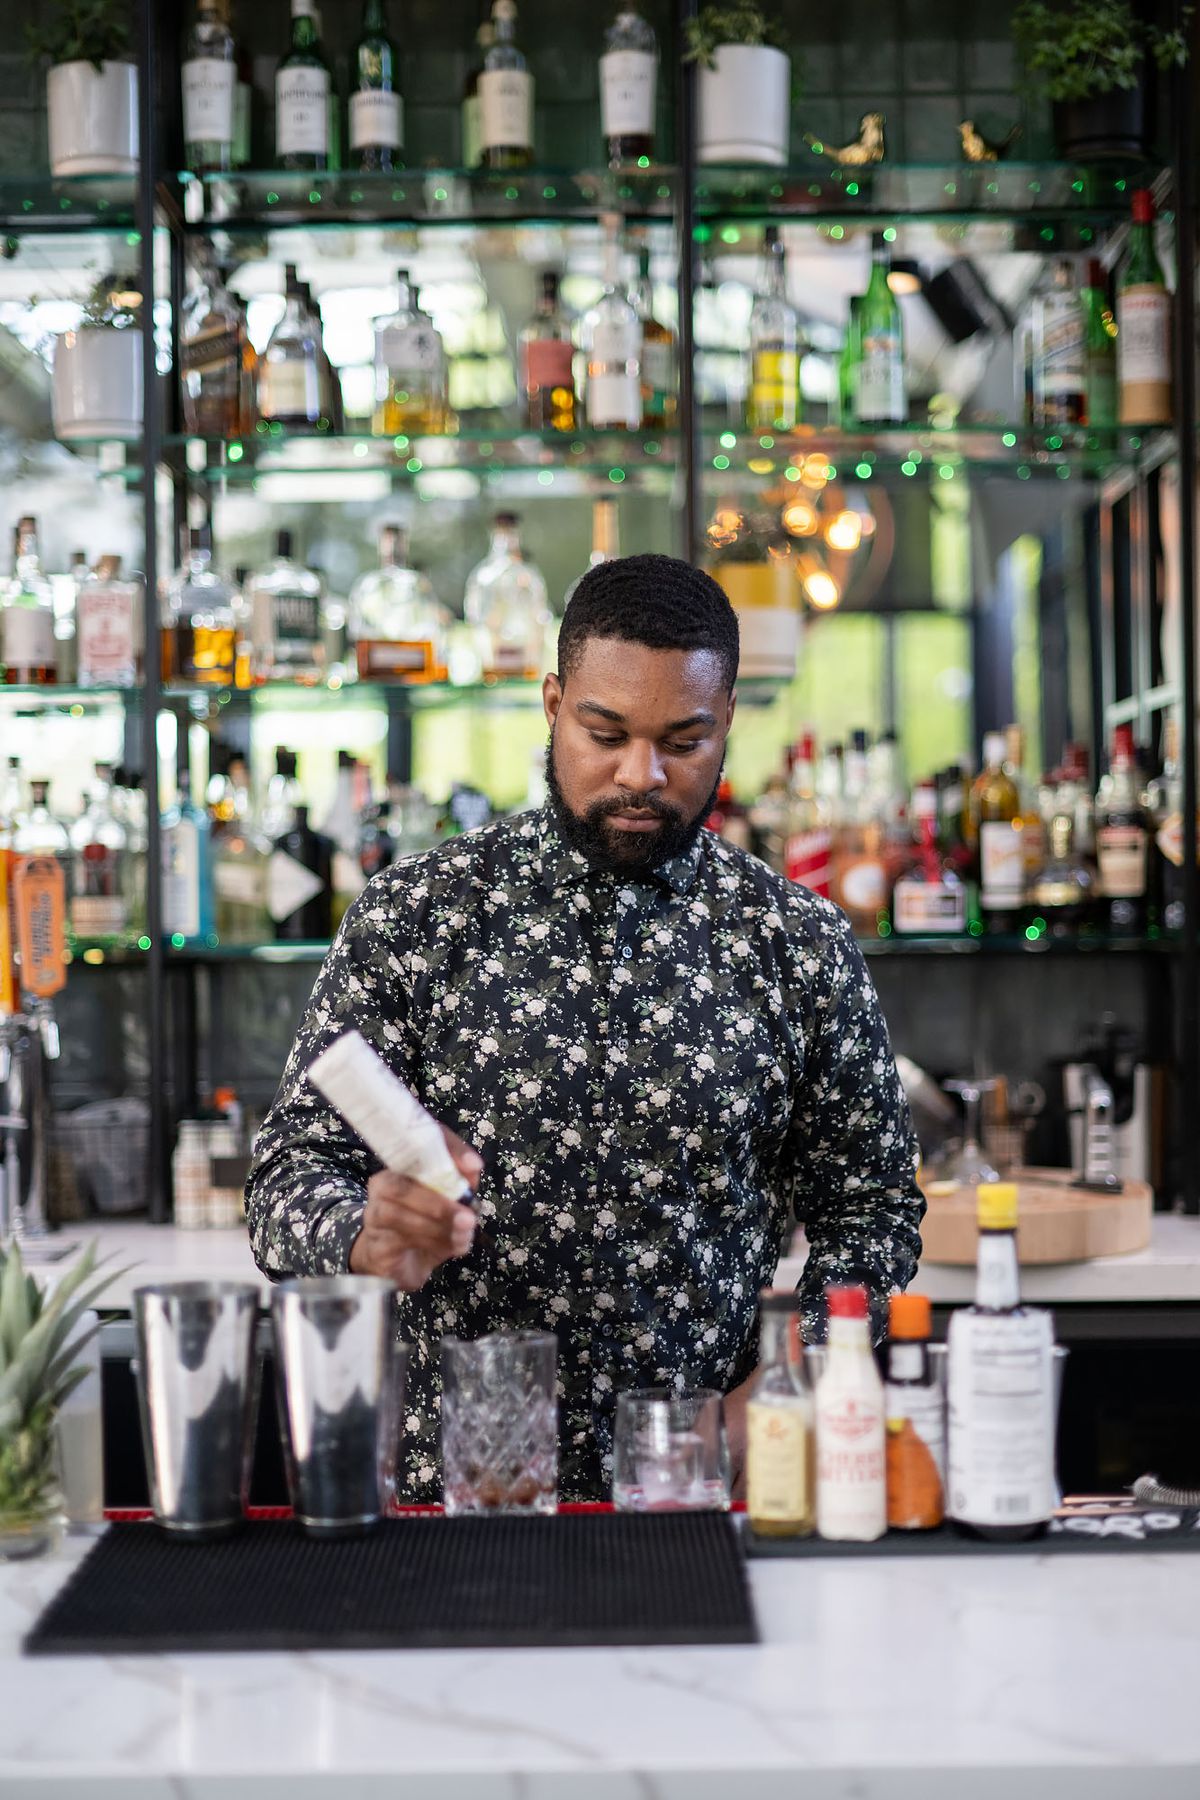 A bartender in a floral print shirt pours dashes of bitters into a cocktail.